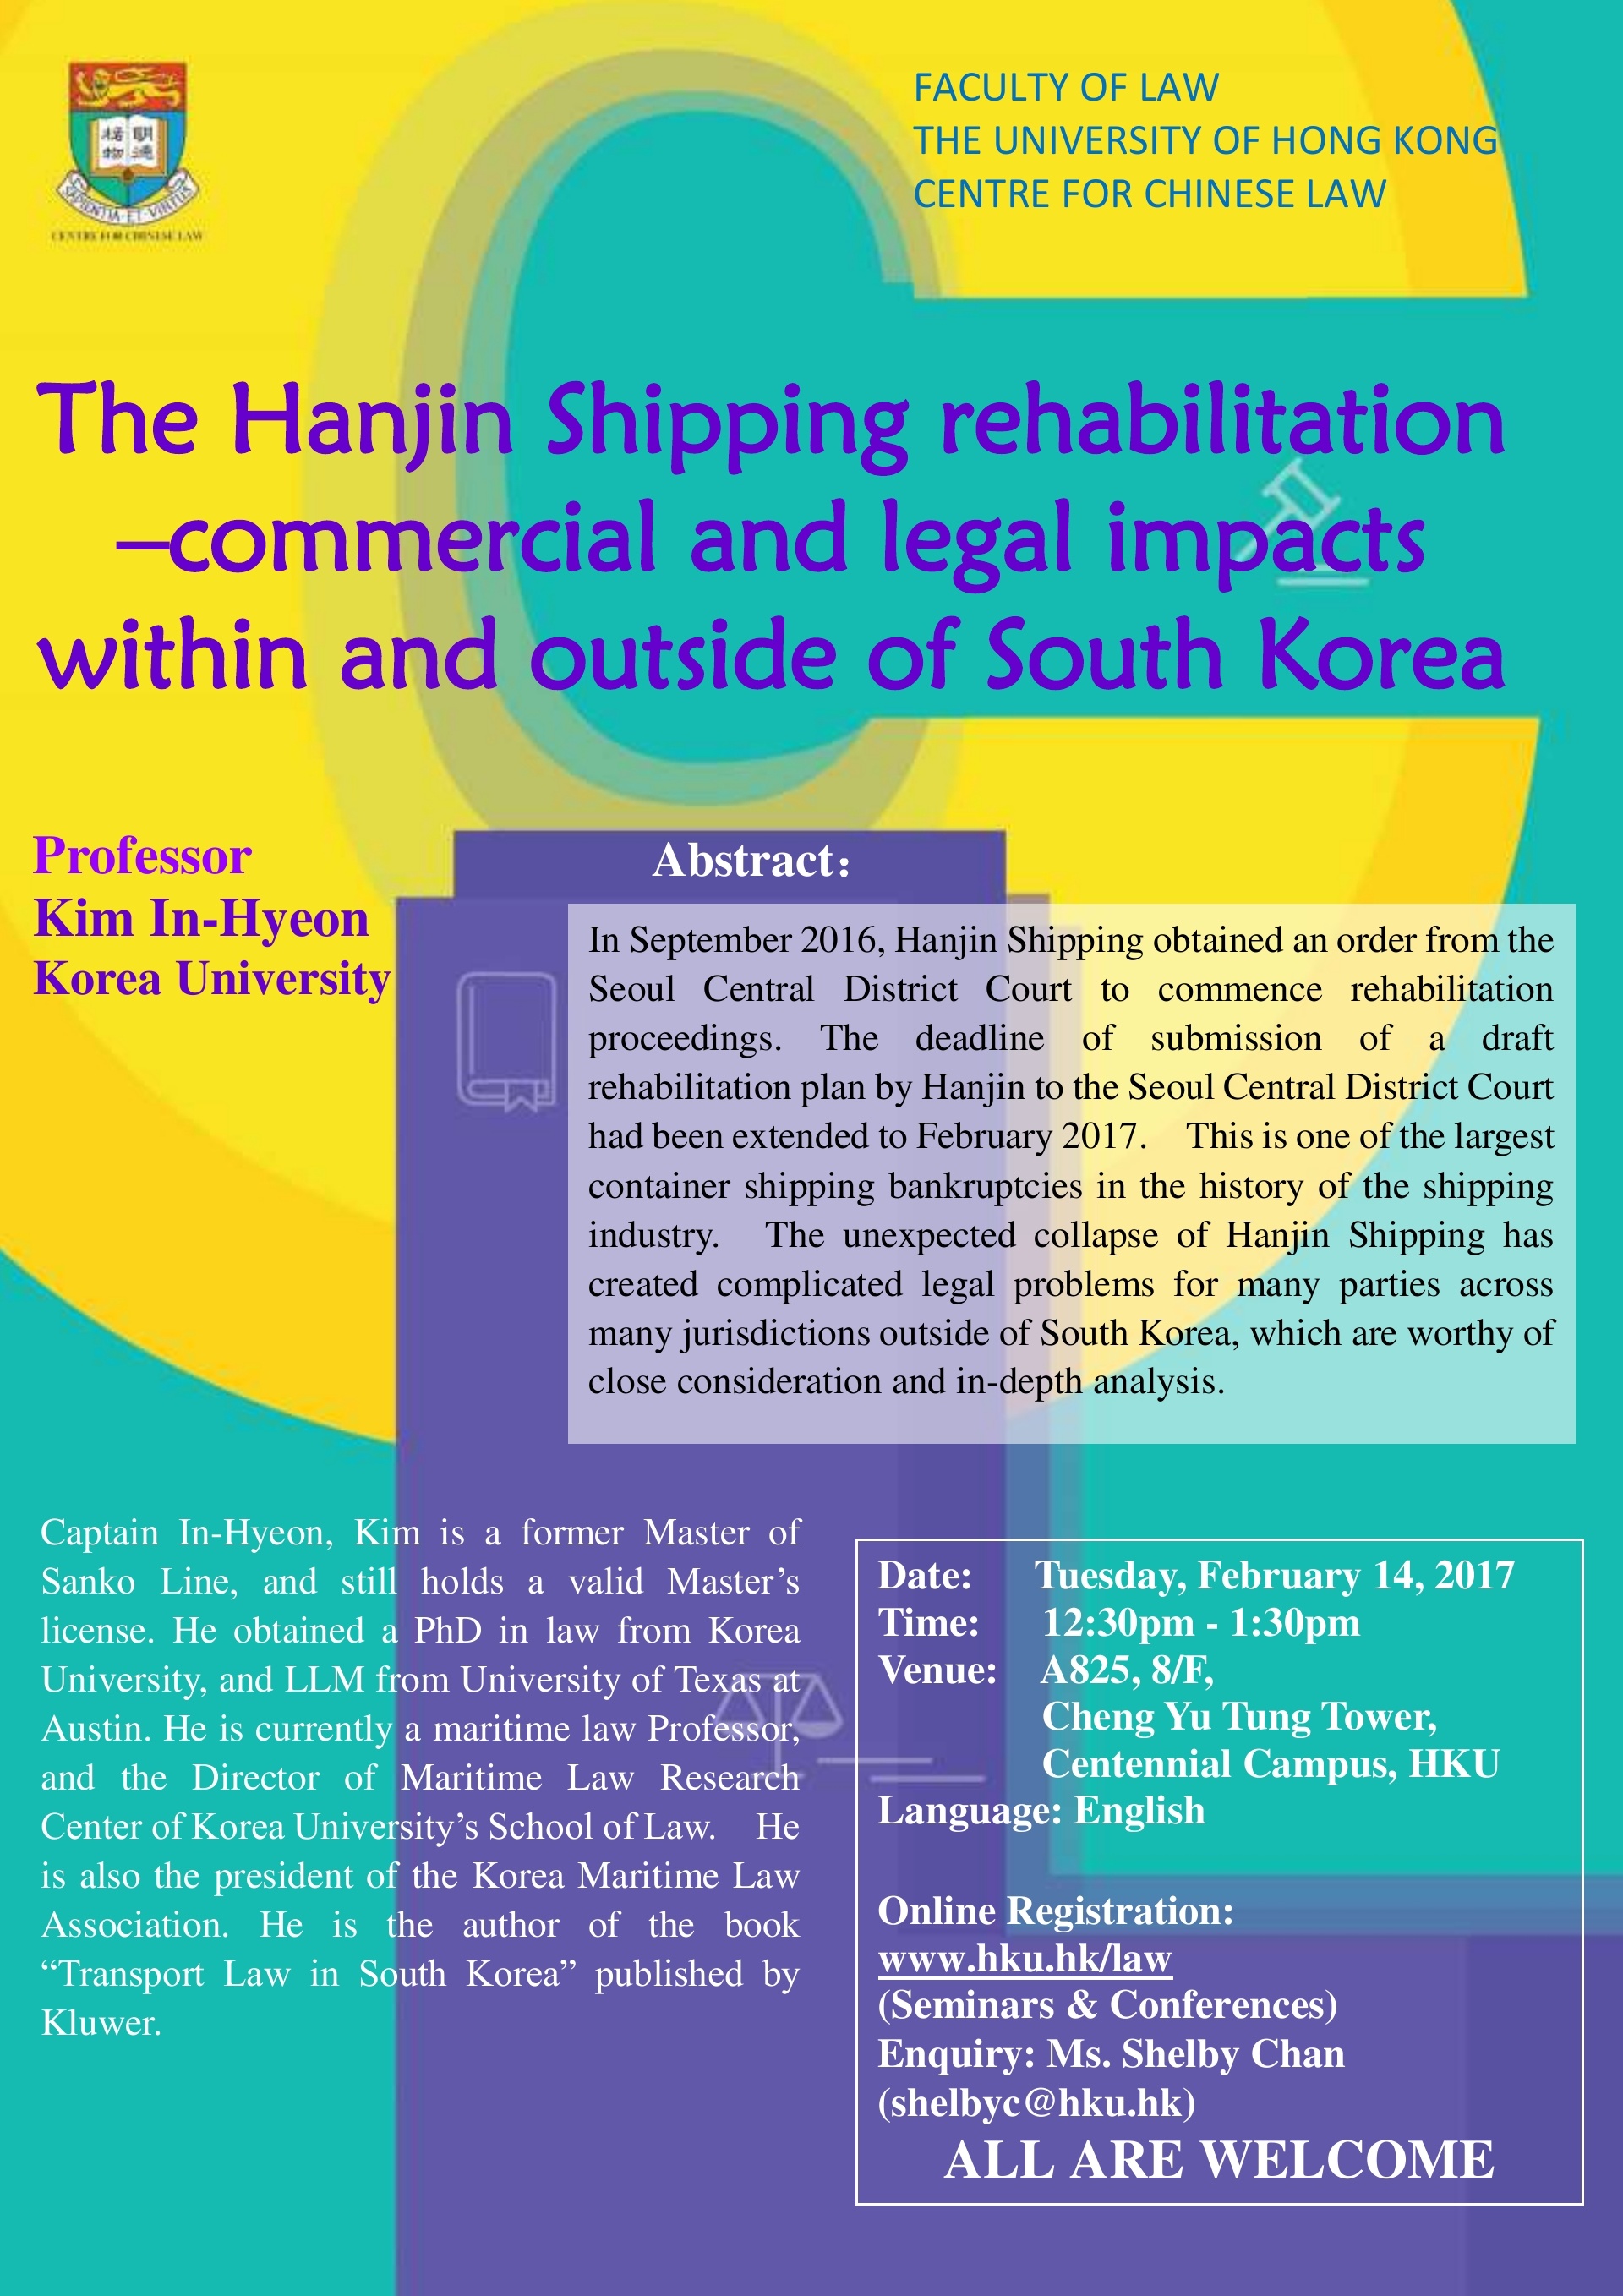 The Hanjin Shipping rehabilitation - commercial and legal impacts within and outside of South Korea